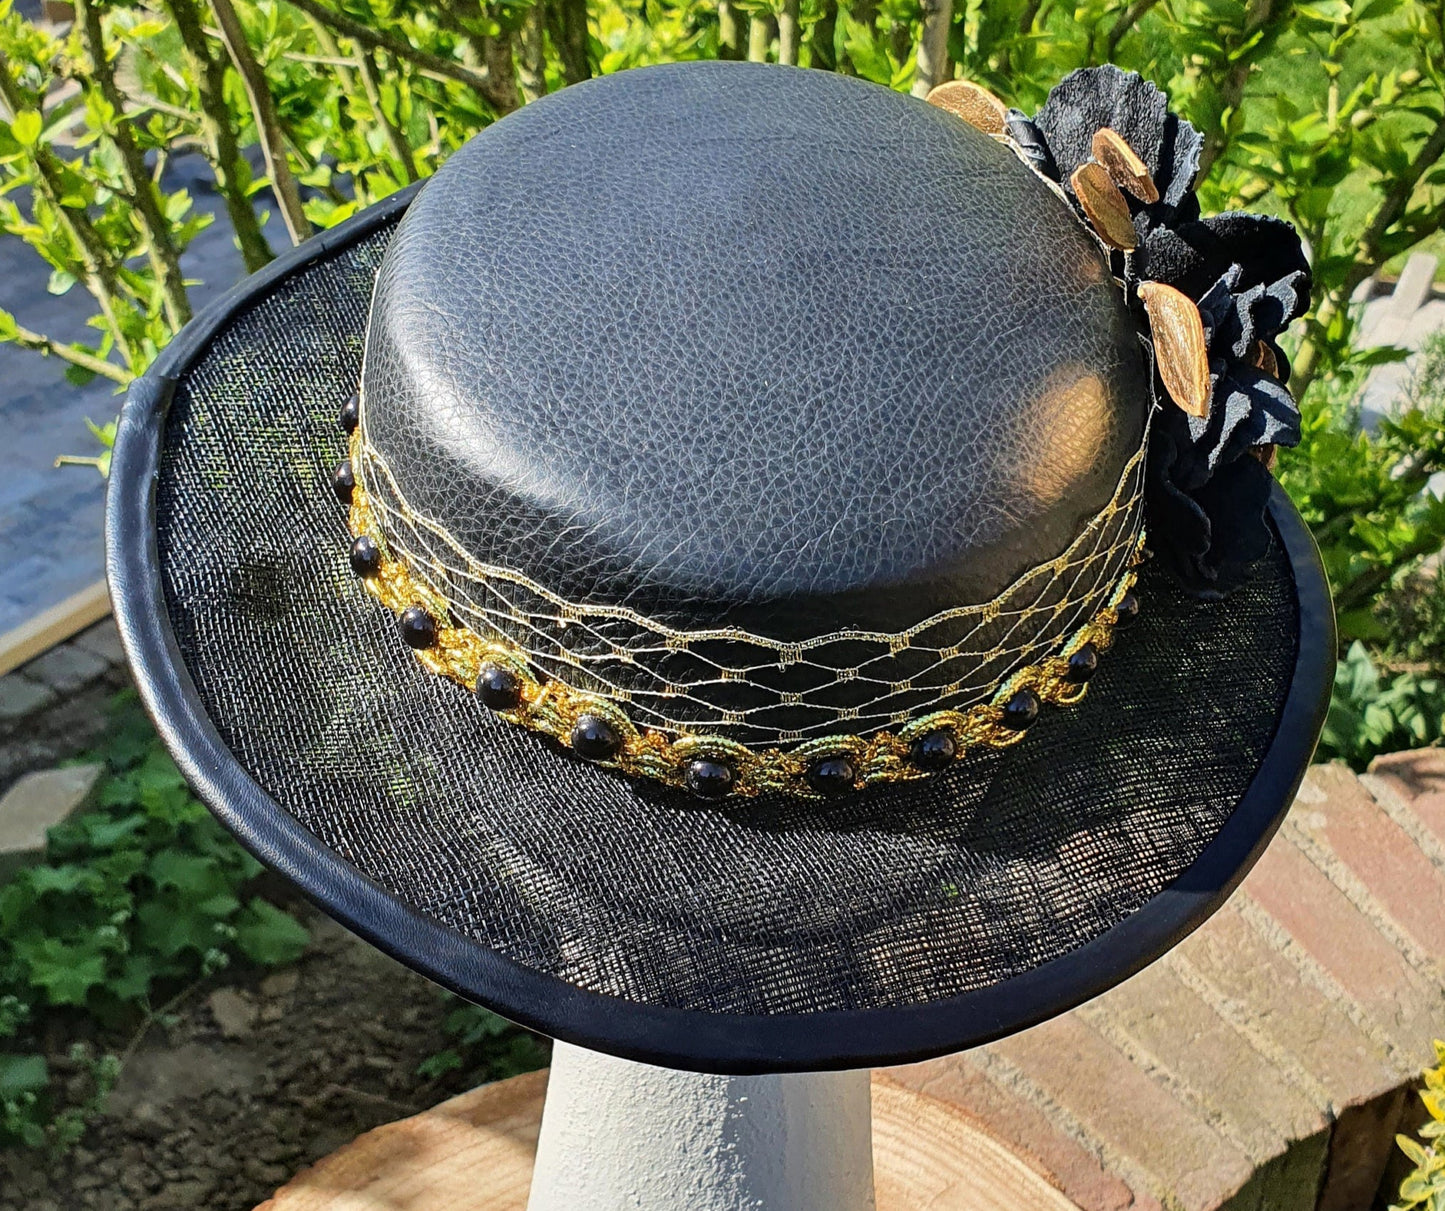 Handmade fascinator gold with black from natural leather and sinamay, wedding hat, guest hat, women's hat, special occasion hat